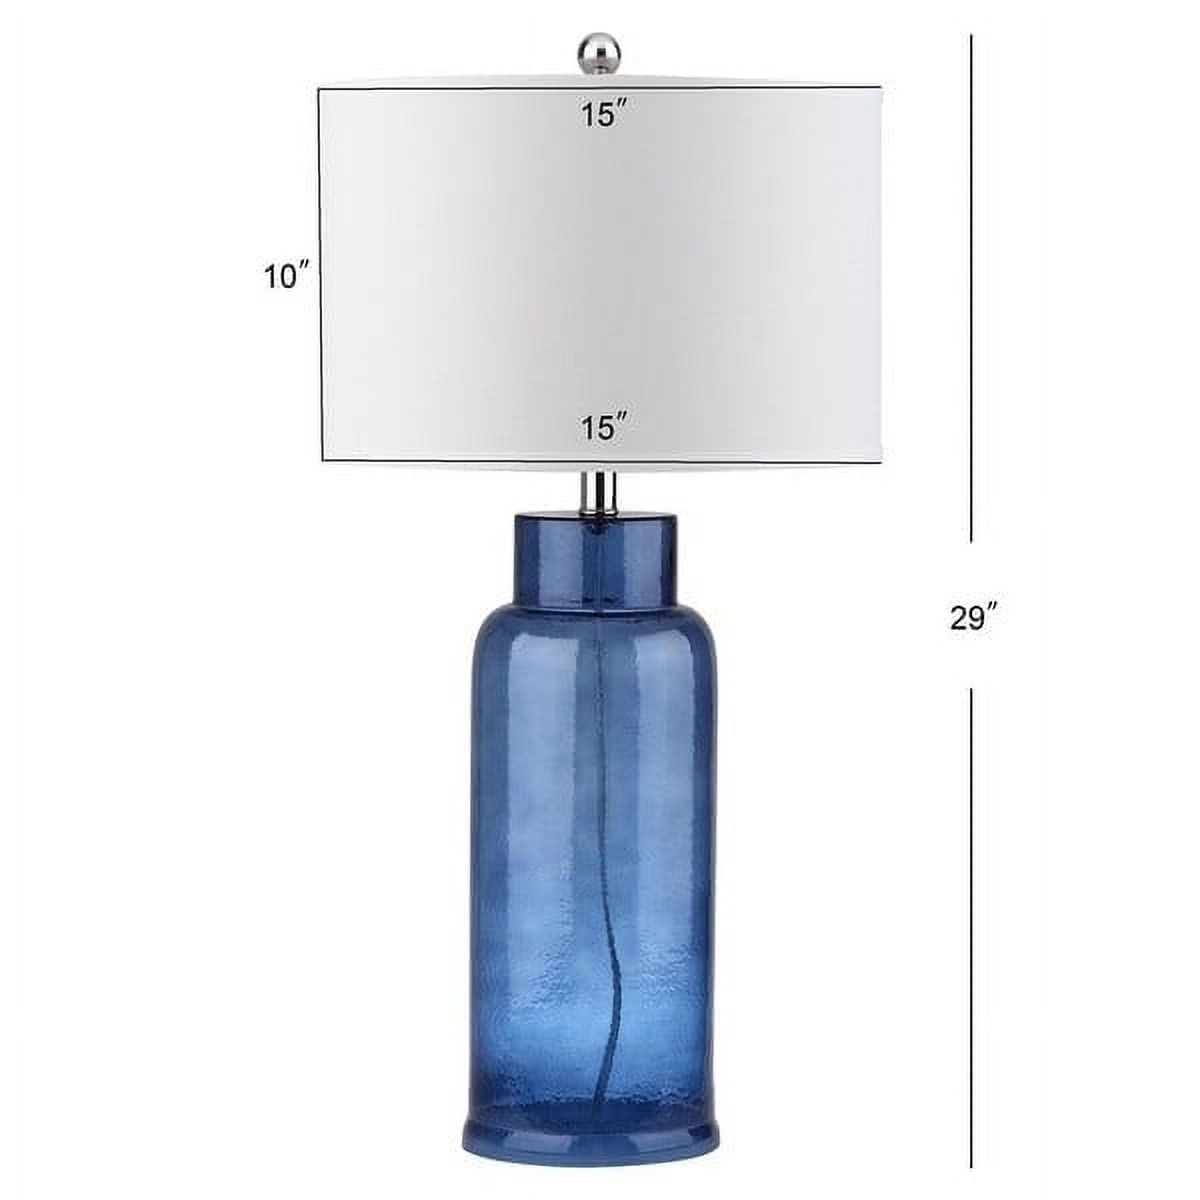 SAFAVIEH 29 in. H Sea Glass Bottle Table Lamp, Blue, Set of 2 - image 1 of 4